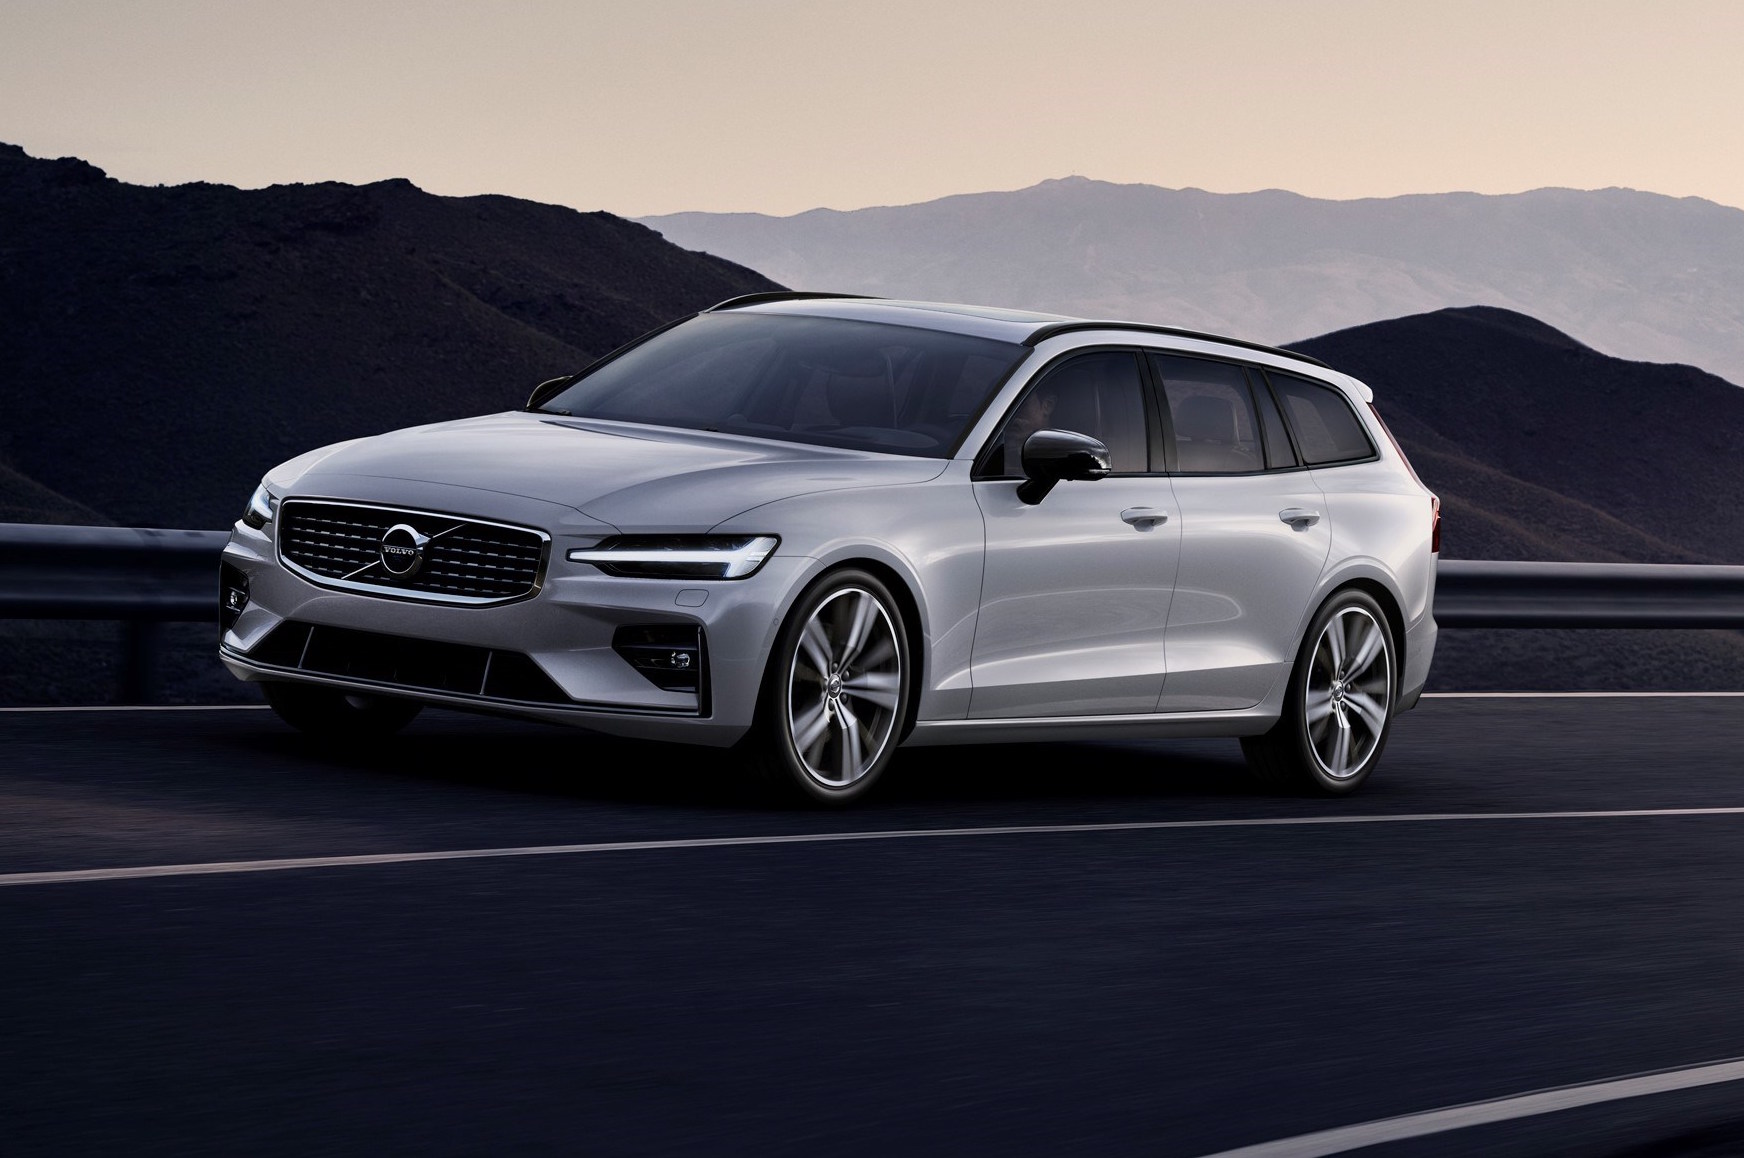 2019 Volvo V60 RDesign pack revealed, adds cool sporty